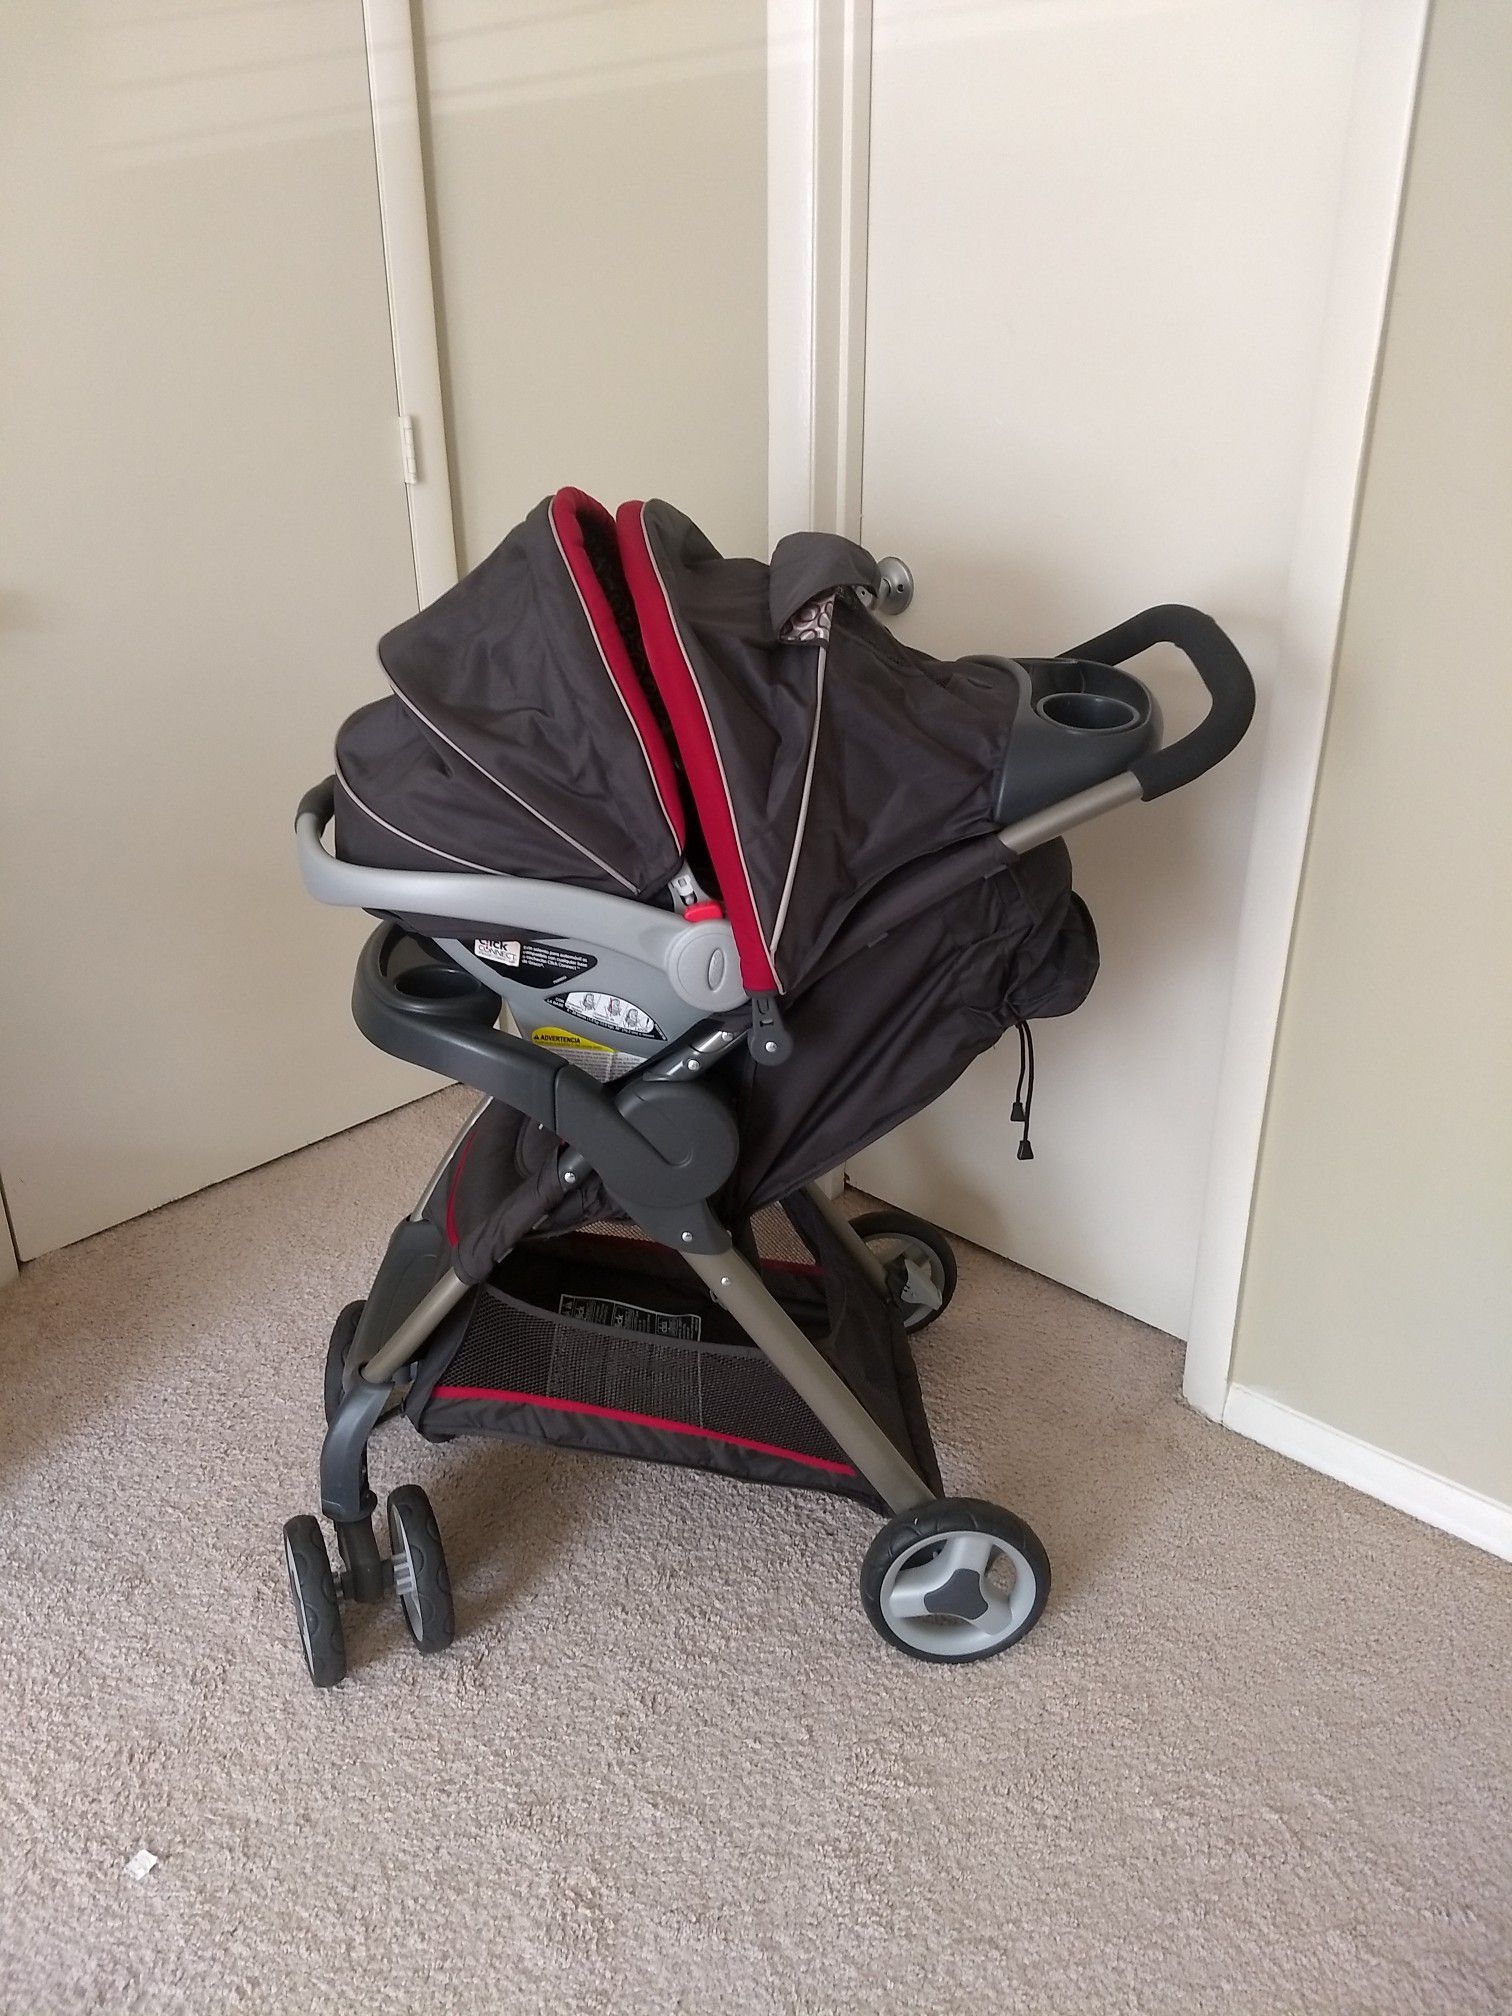 Stroller and car seat with car seat base